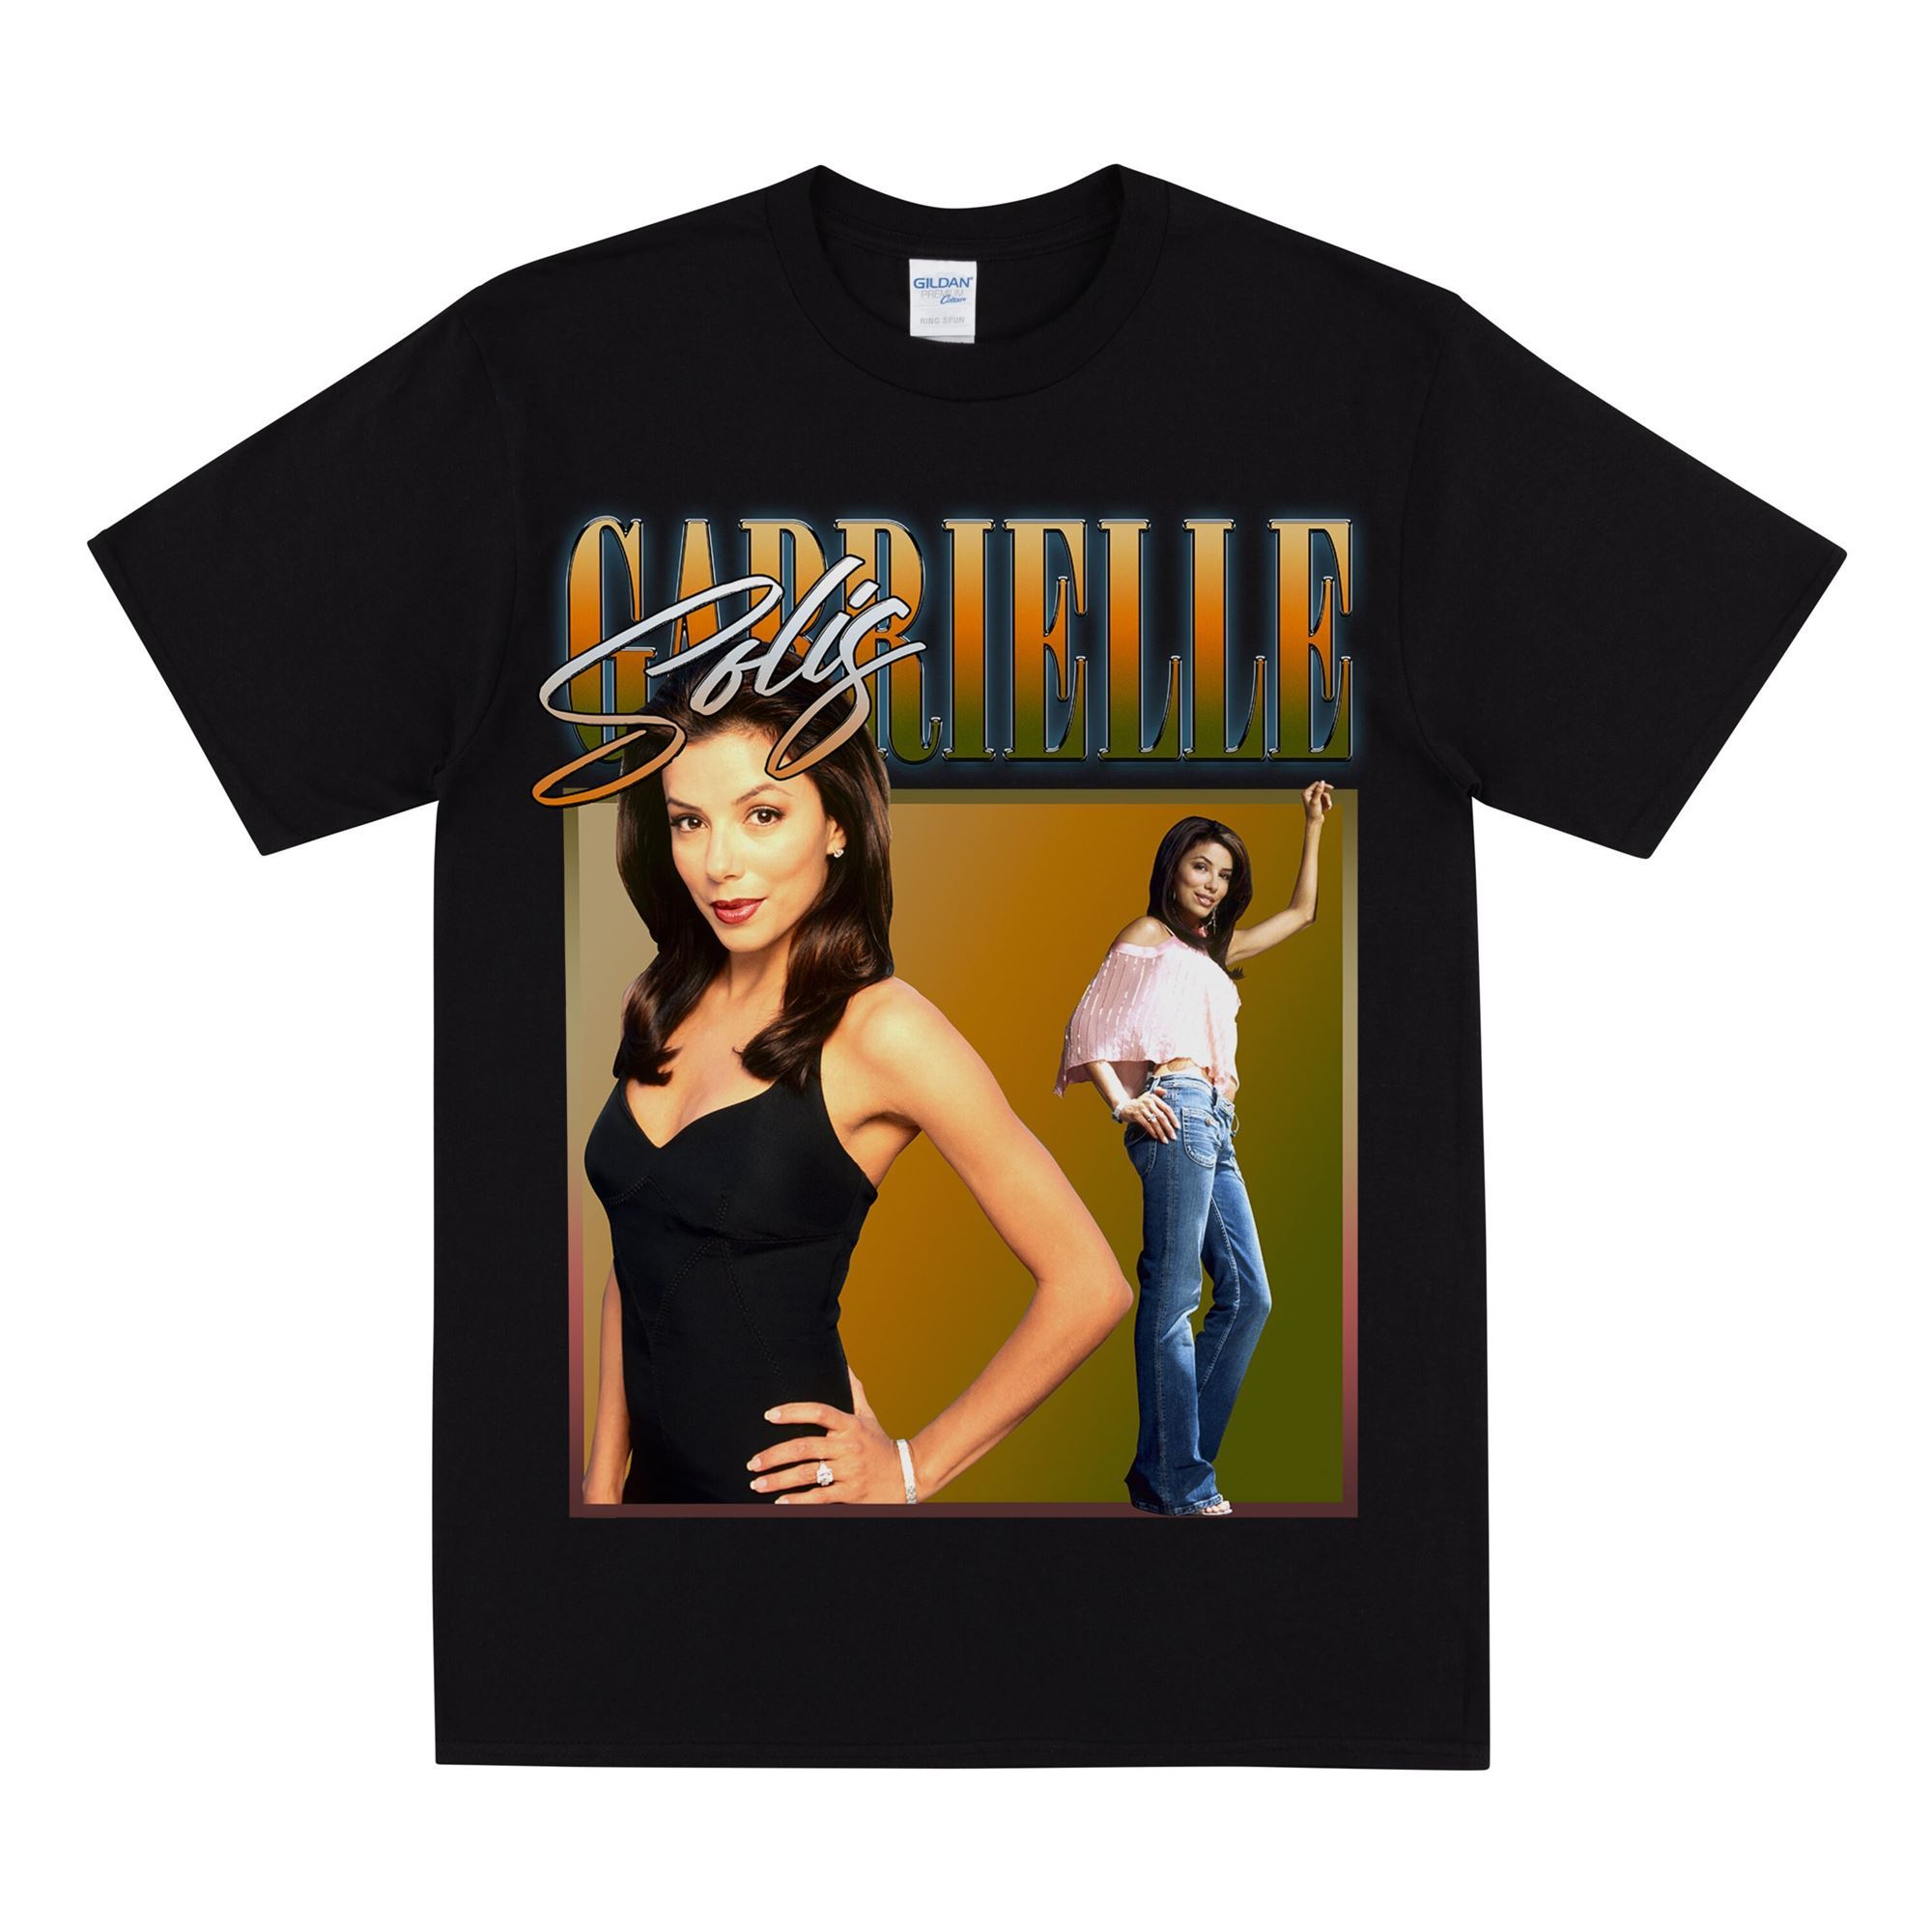 Happy Gabrielle Solis Homage T-shirt For Desperate Housewives Fans Women's Men's Unisex Print T Shirt Tv Comedy Series Funny Tee 